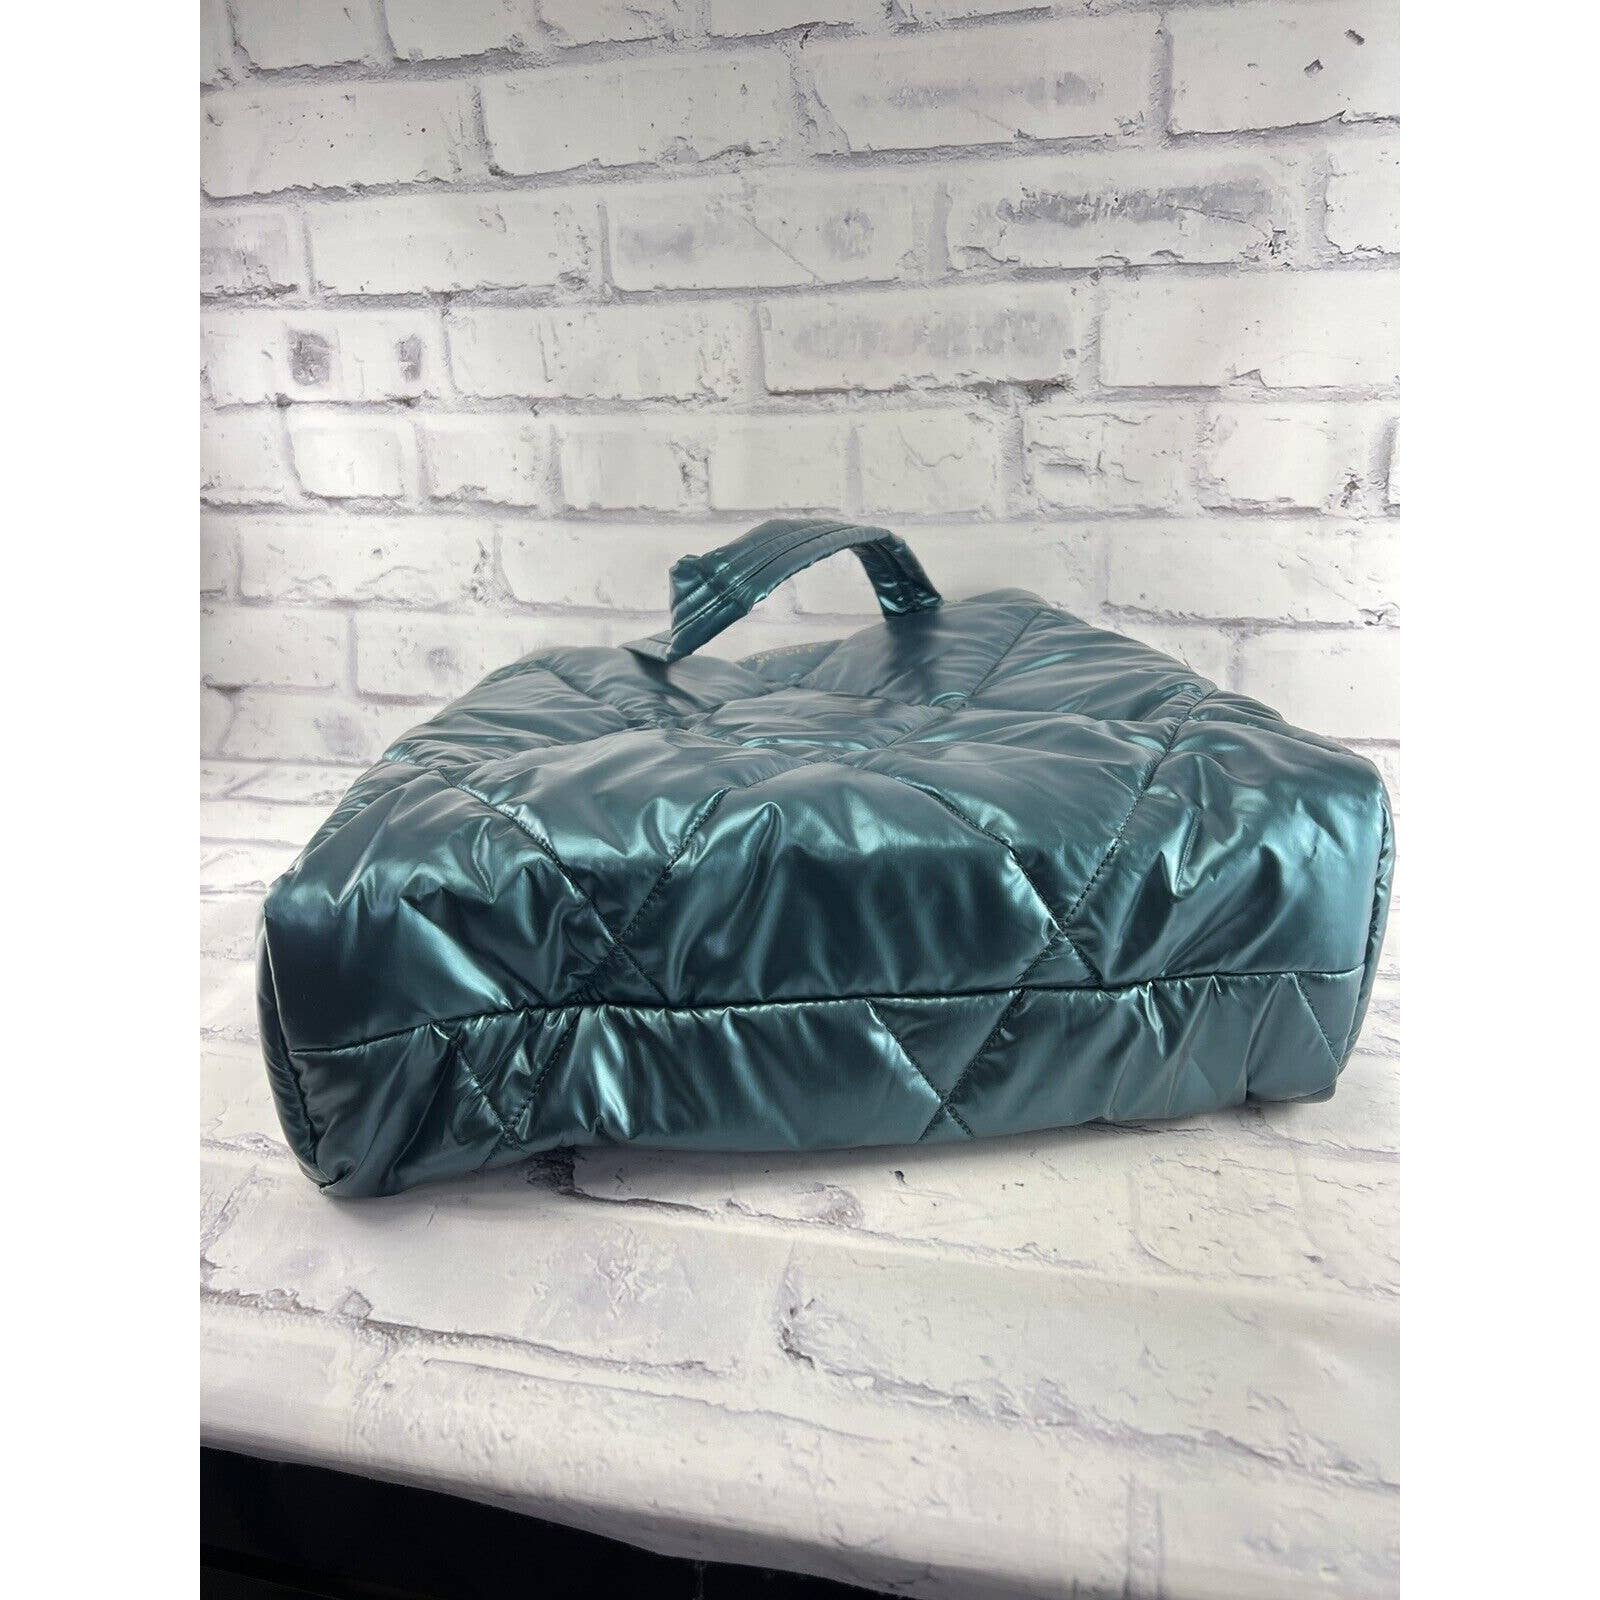 Victoria's Secret Puffer Tote Bag Holiday Large Quilted Green Teal Metallic